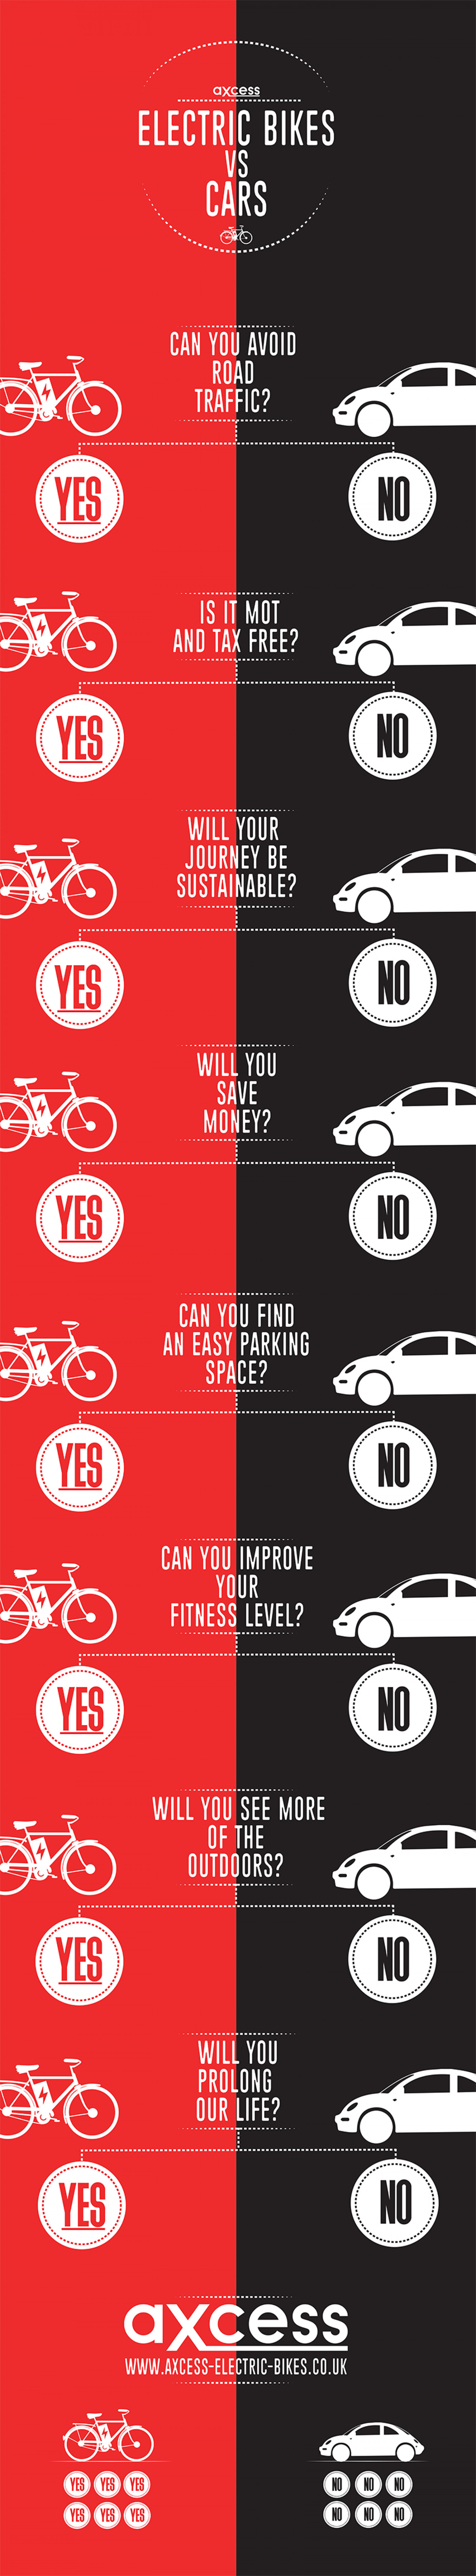 Why Electric Bikes Are Great - E-Bikes VS Infographics Infographic